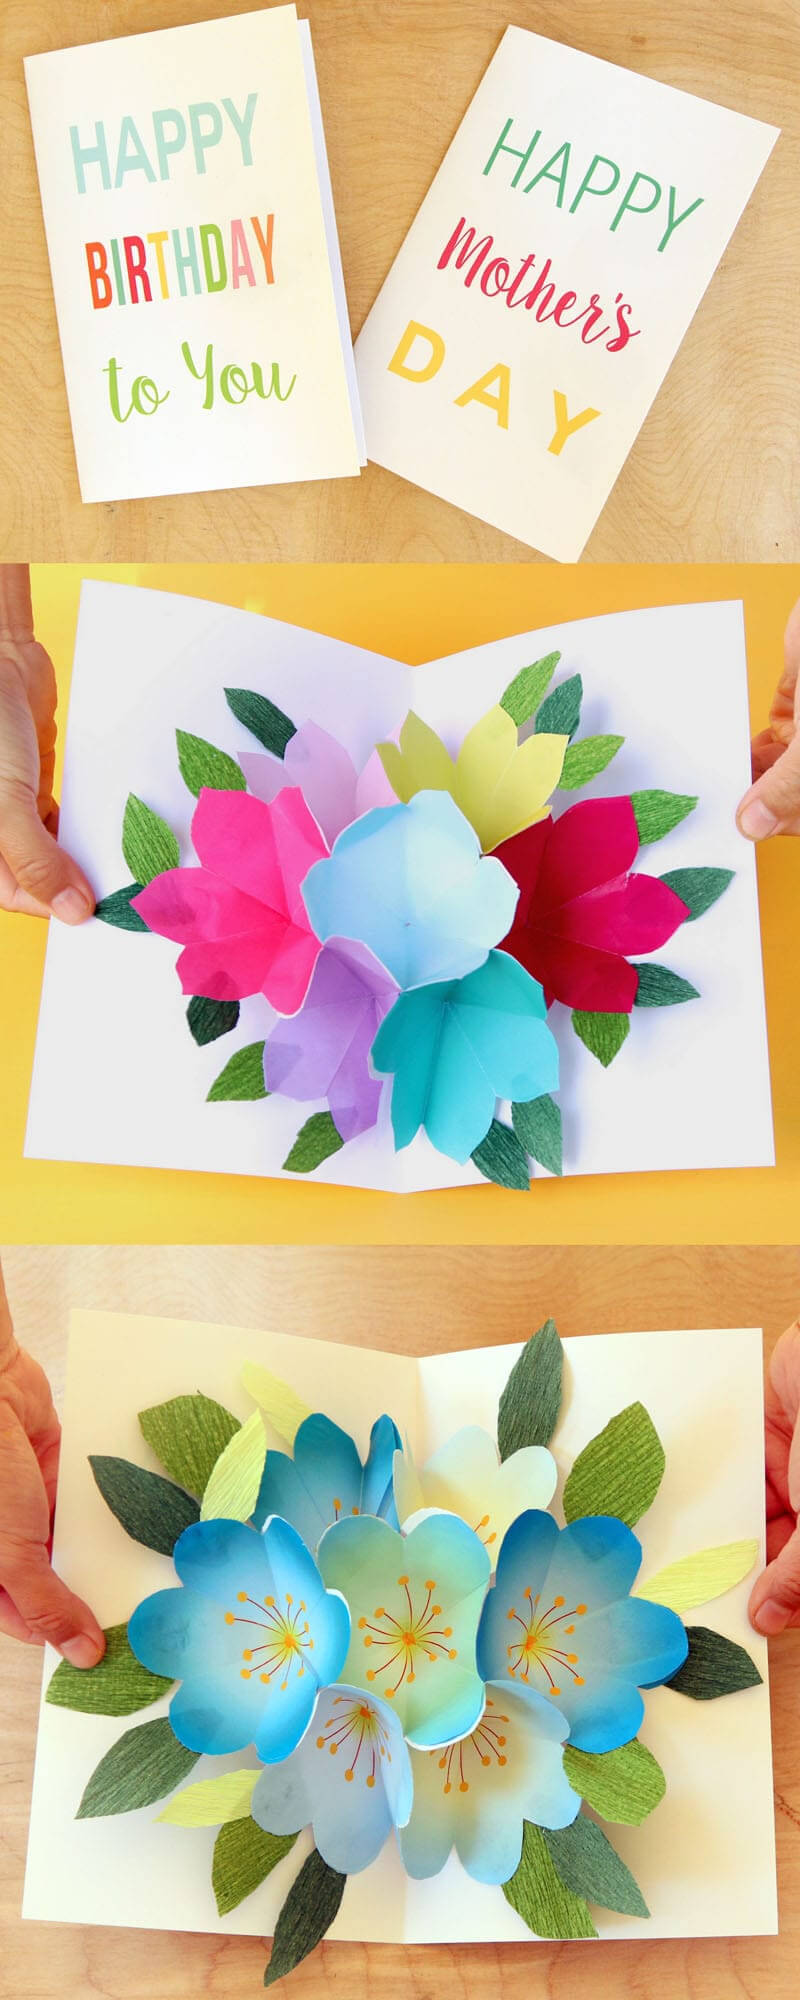 Free Printable Happy Birthday Card With Pop Up Bouquet – A With Regard To Free Printable Pop Up Card Templates